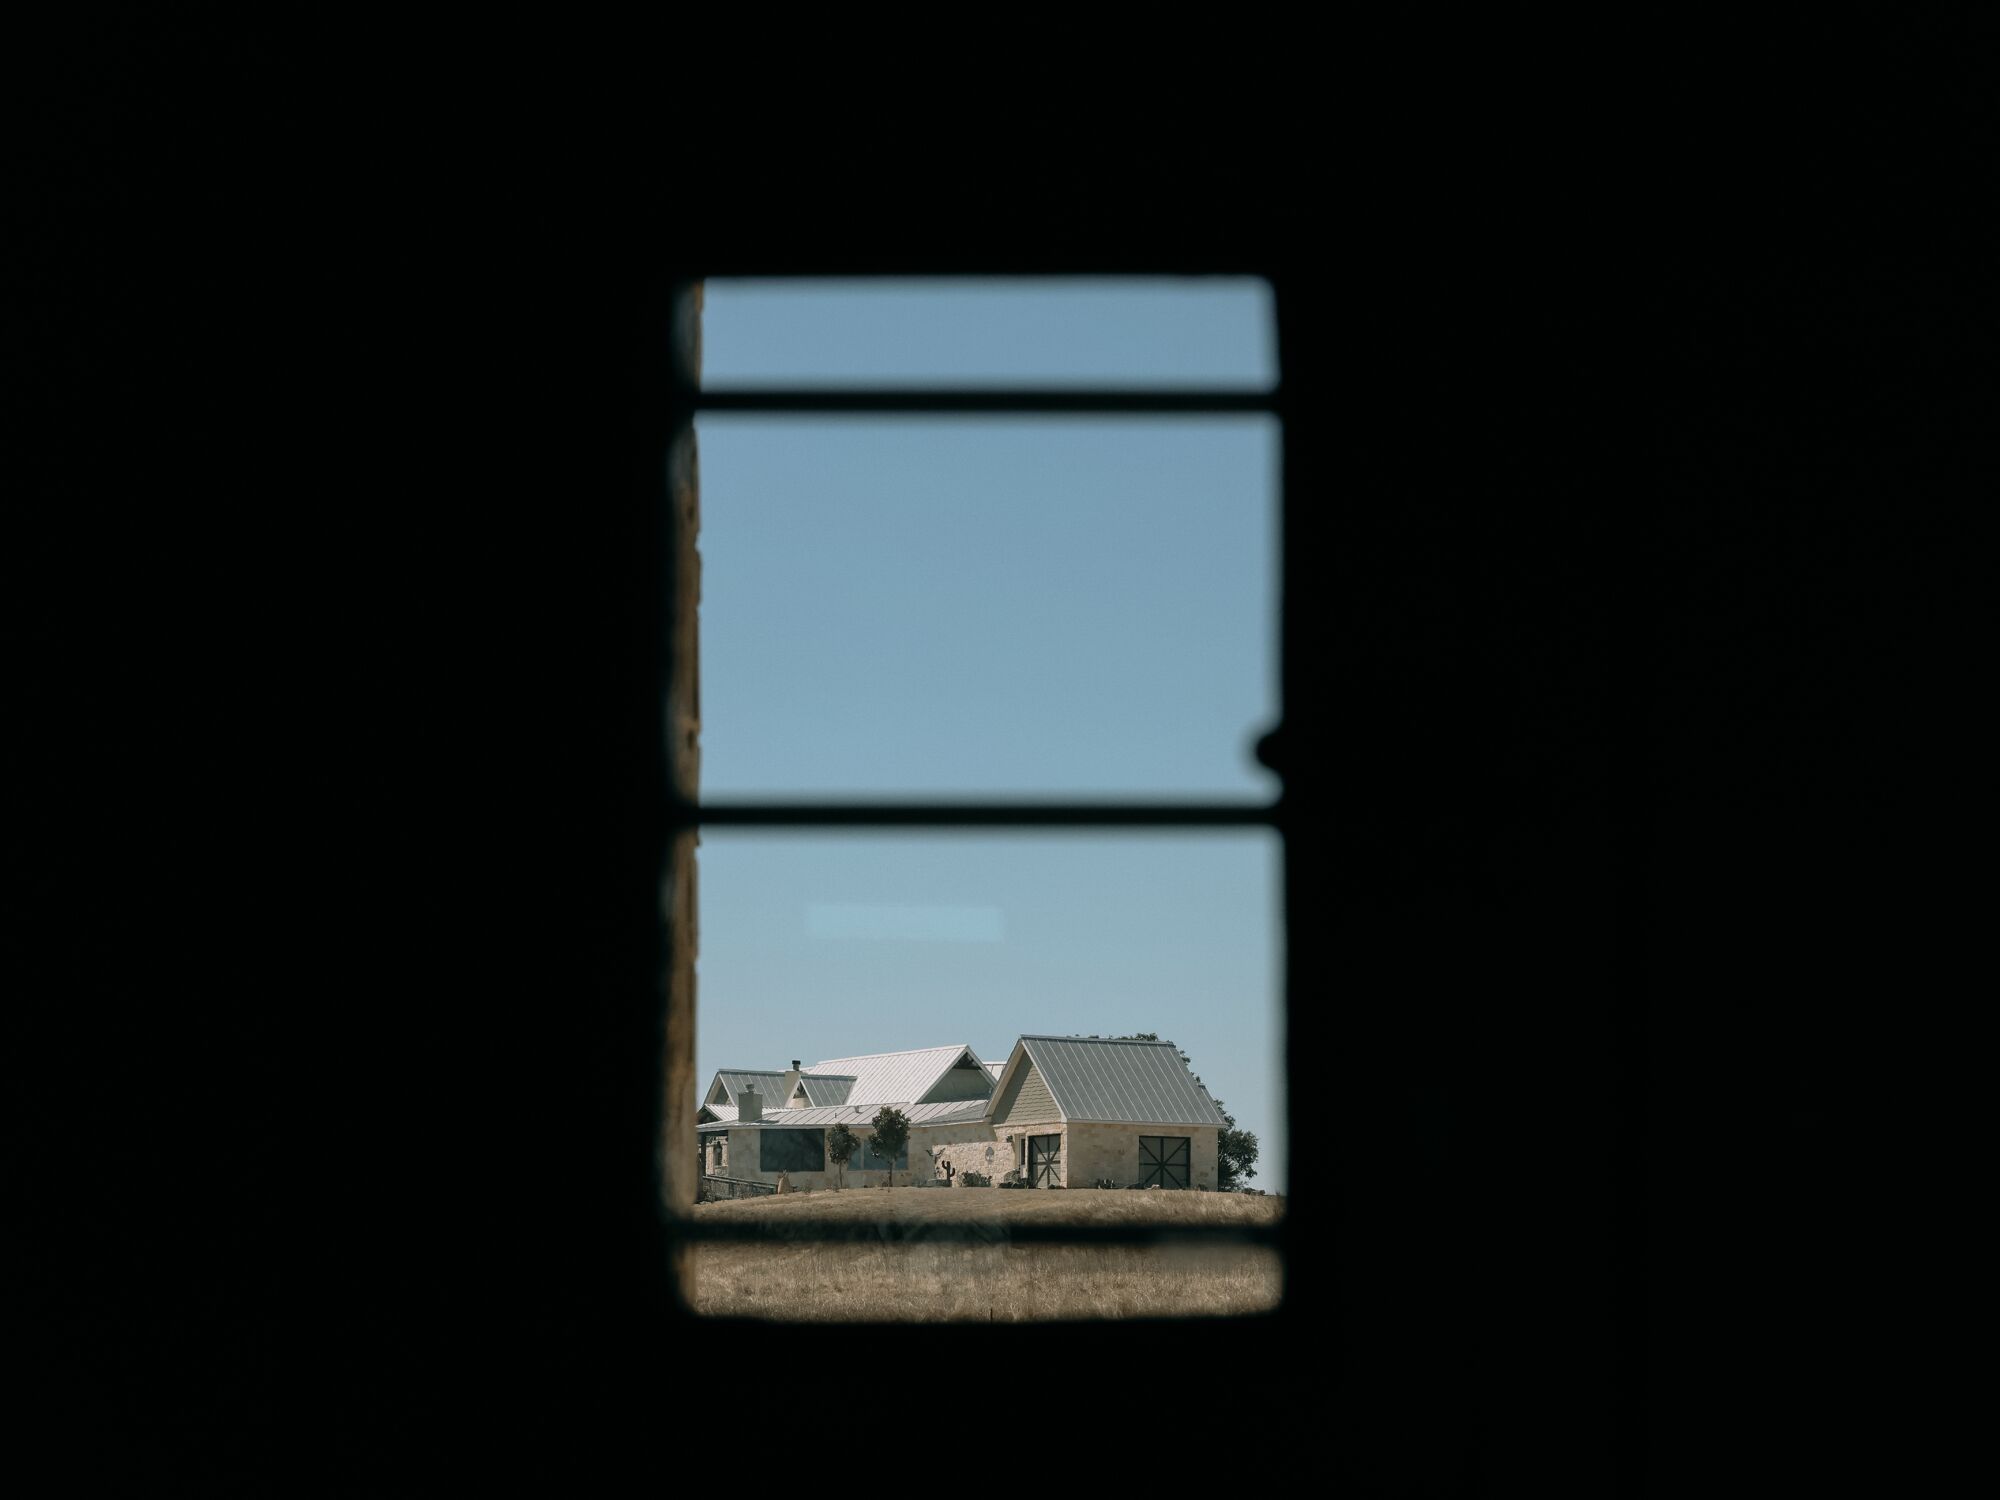 A house can be seen from a window.